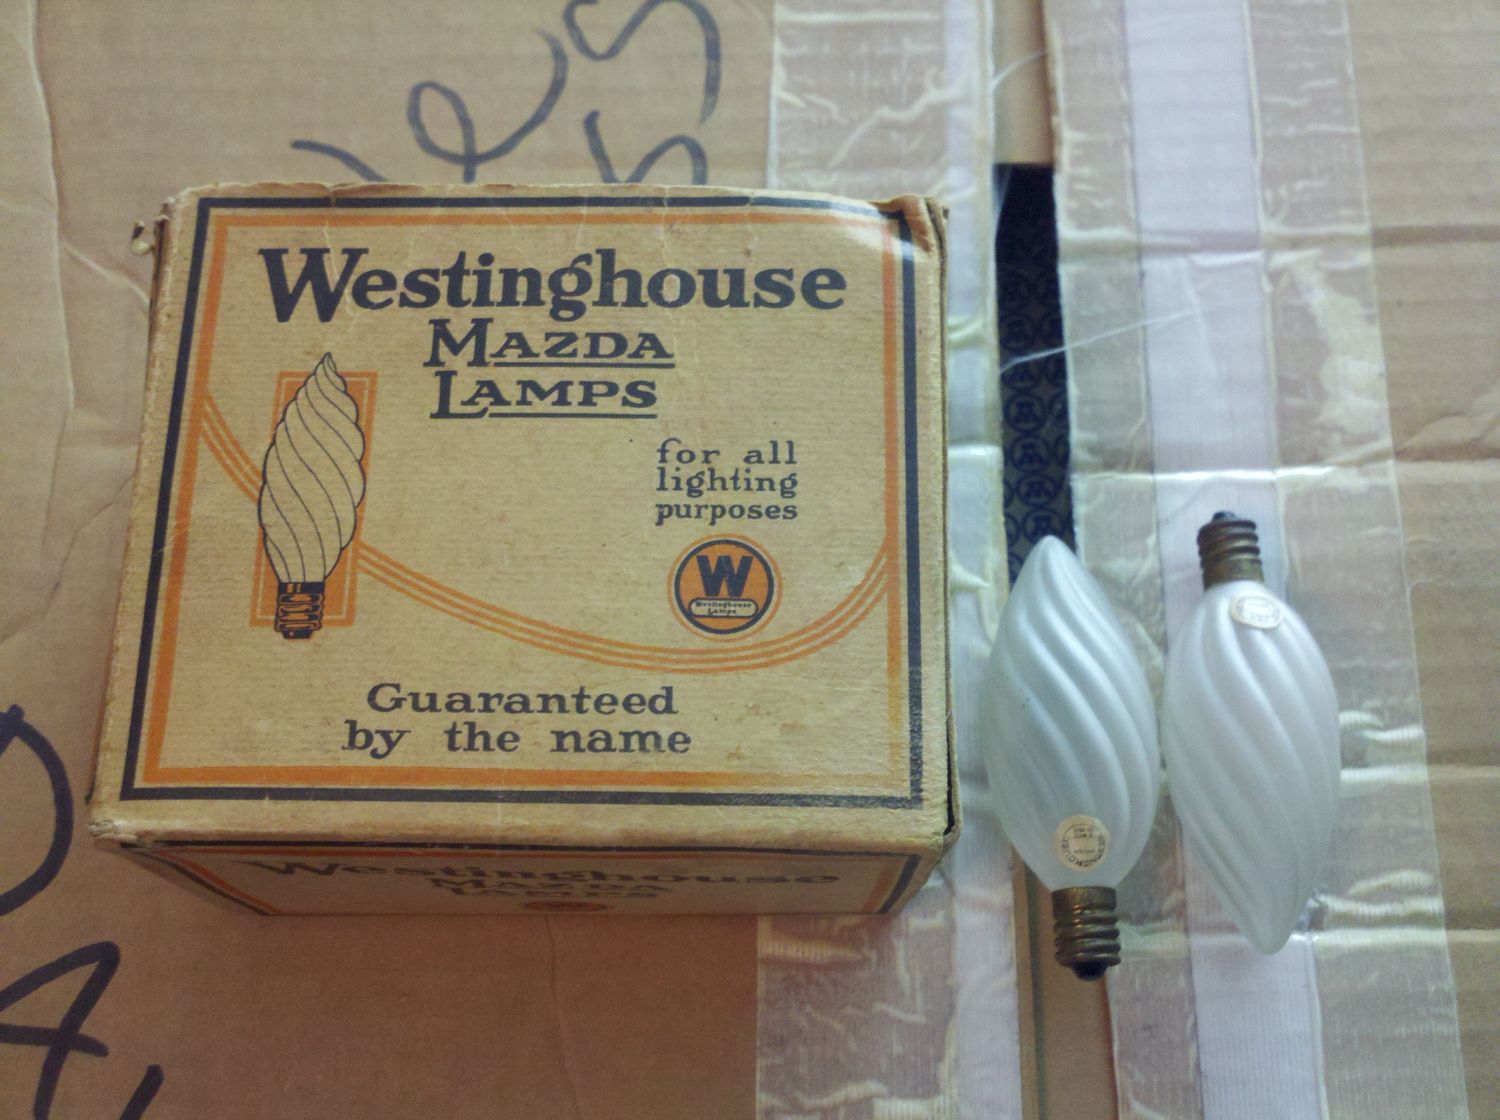 BEAUTIFUL Westinghouse Mazda swirls!
These are cool oldies but goodies, made in the 20s. They have a mini cage filament design, with a single coil filament and 3 supports mounted around a glass arbor.
Keywords: Lamps